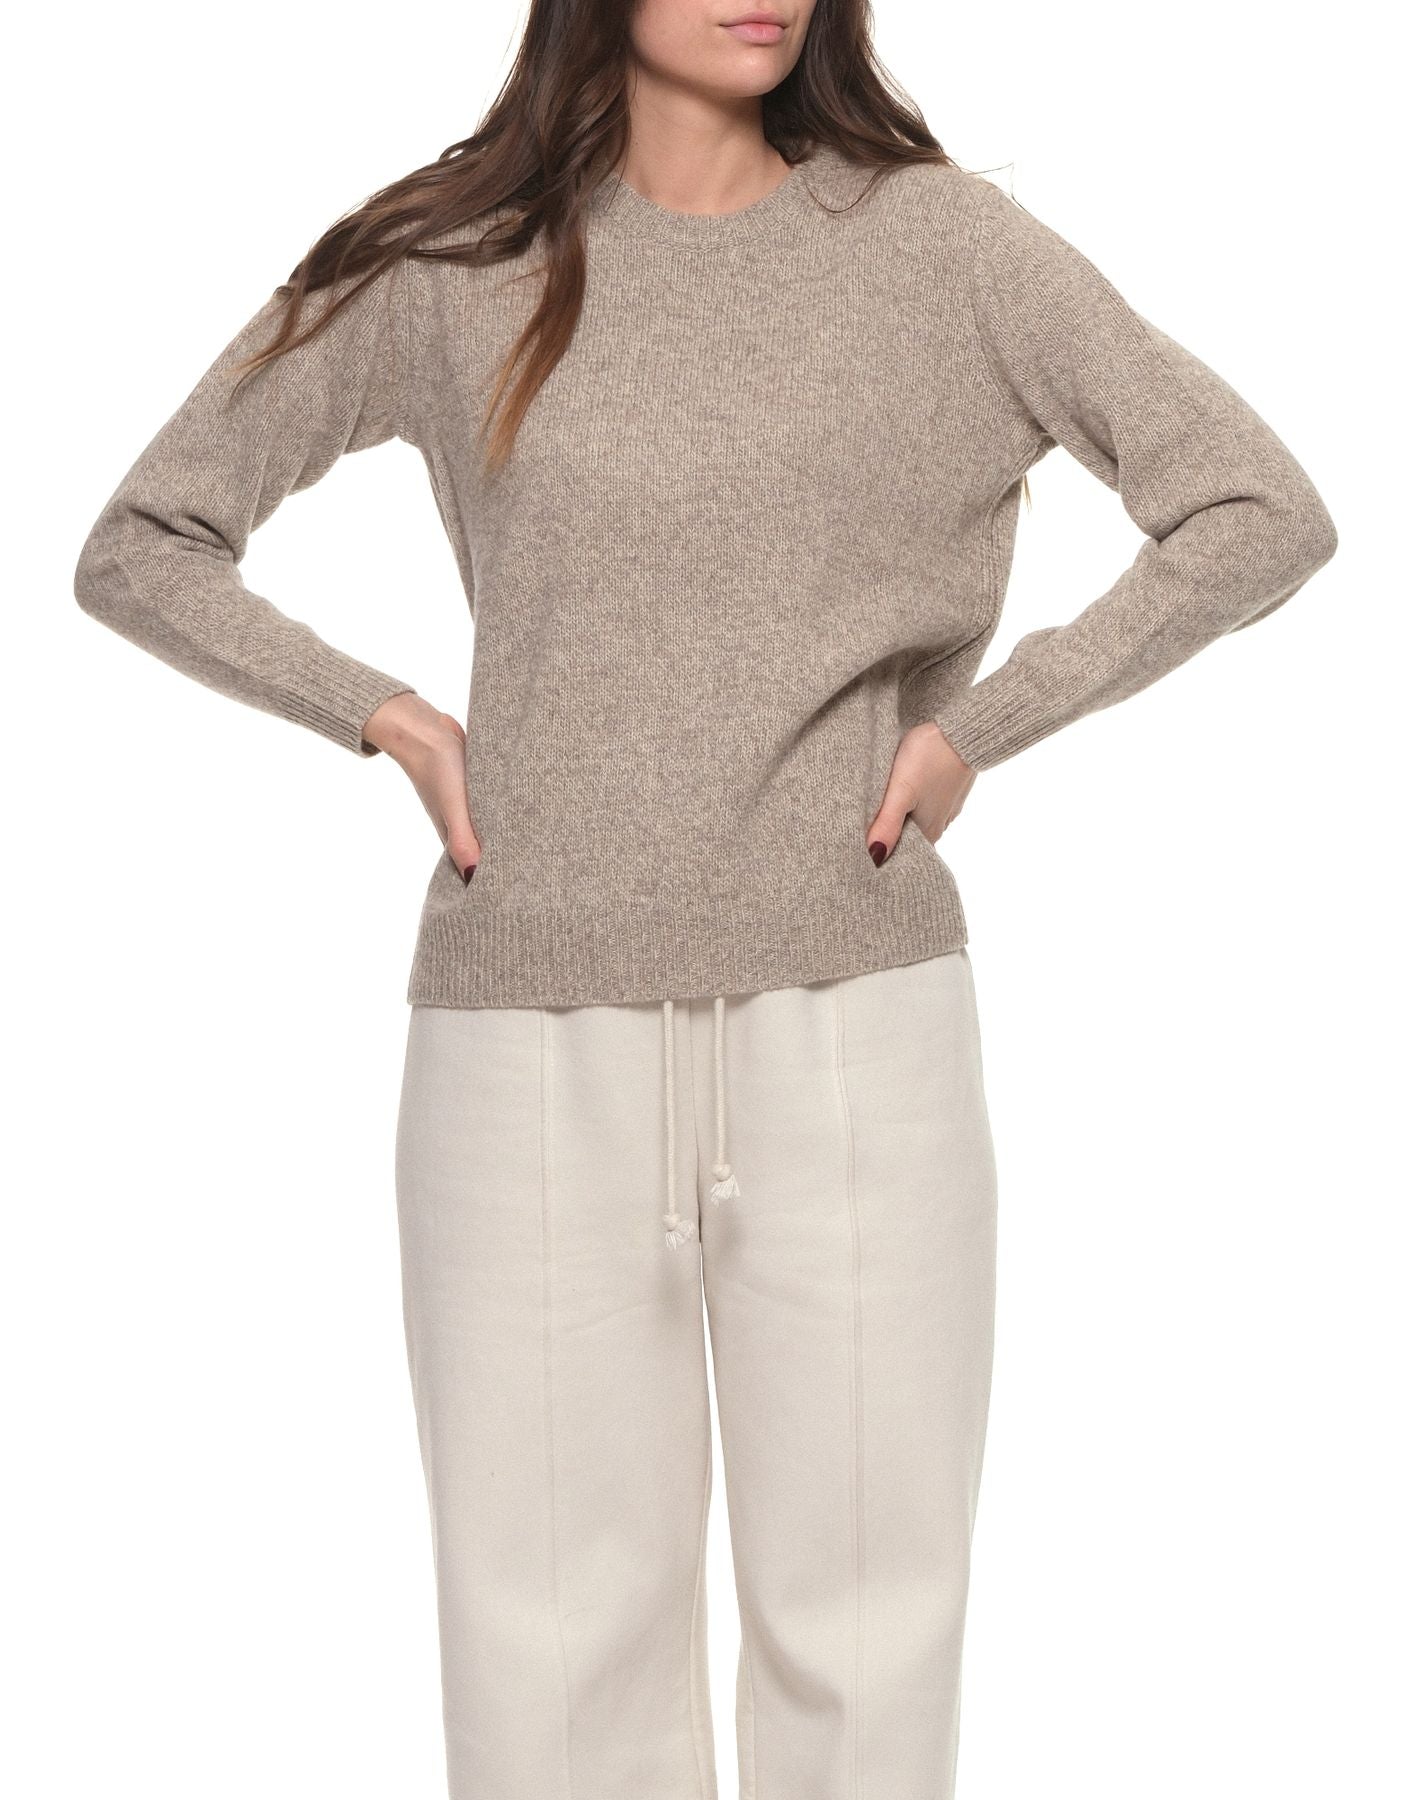 Sweater for woman CT20391 C.T. plage